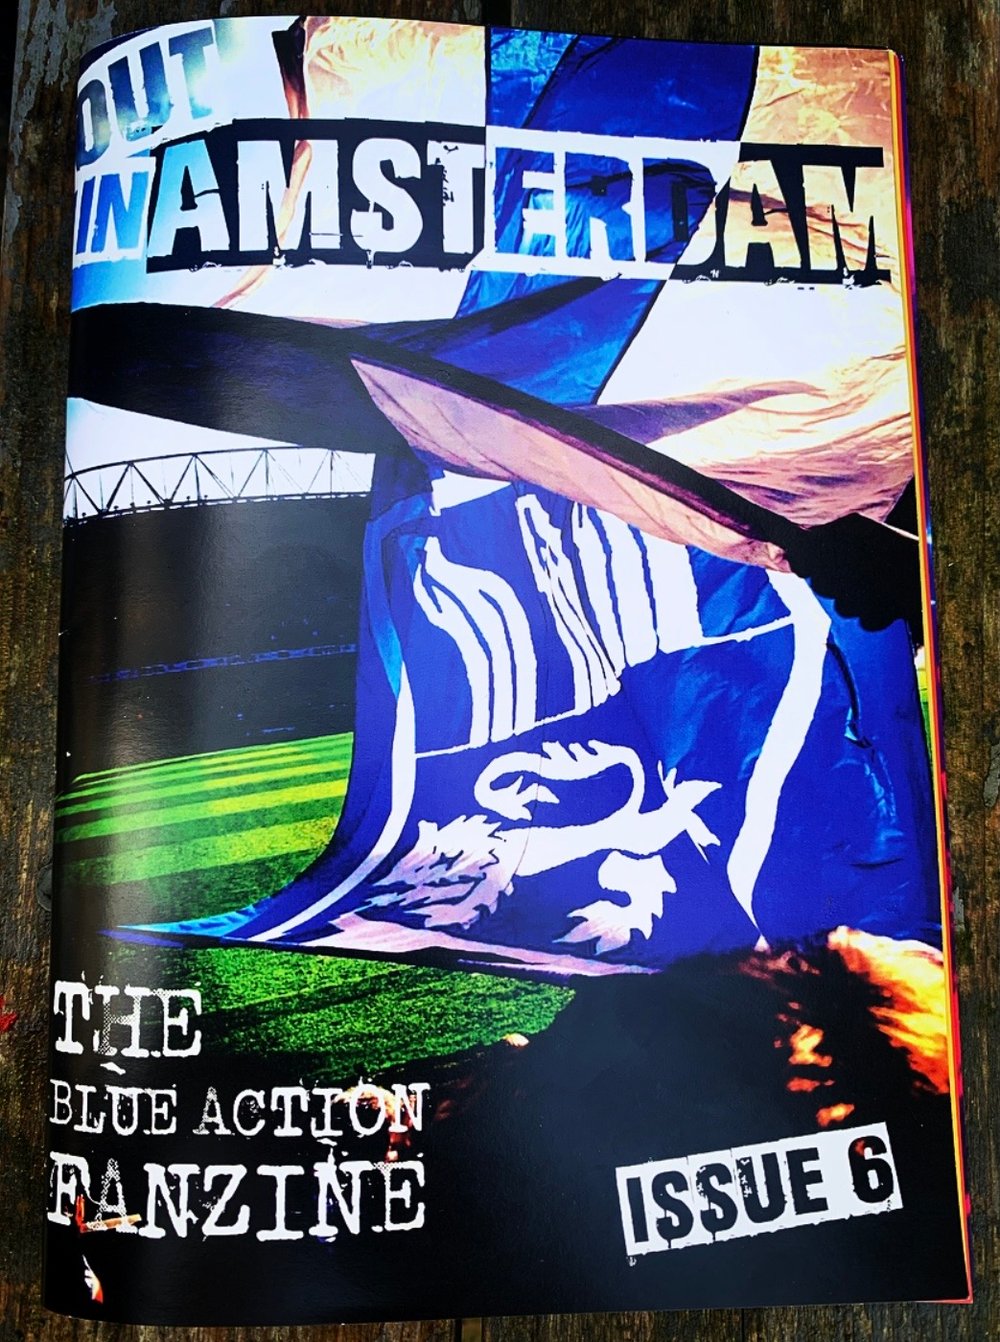 Out in Amsterdam The Blue Action Fanzine (ISSUE 6)